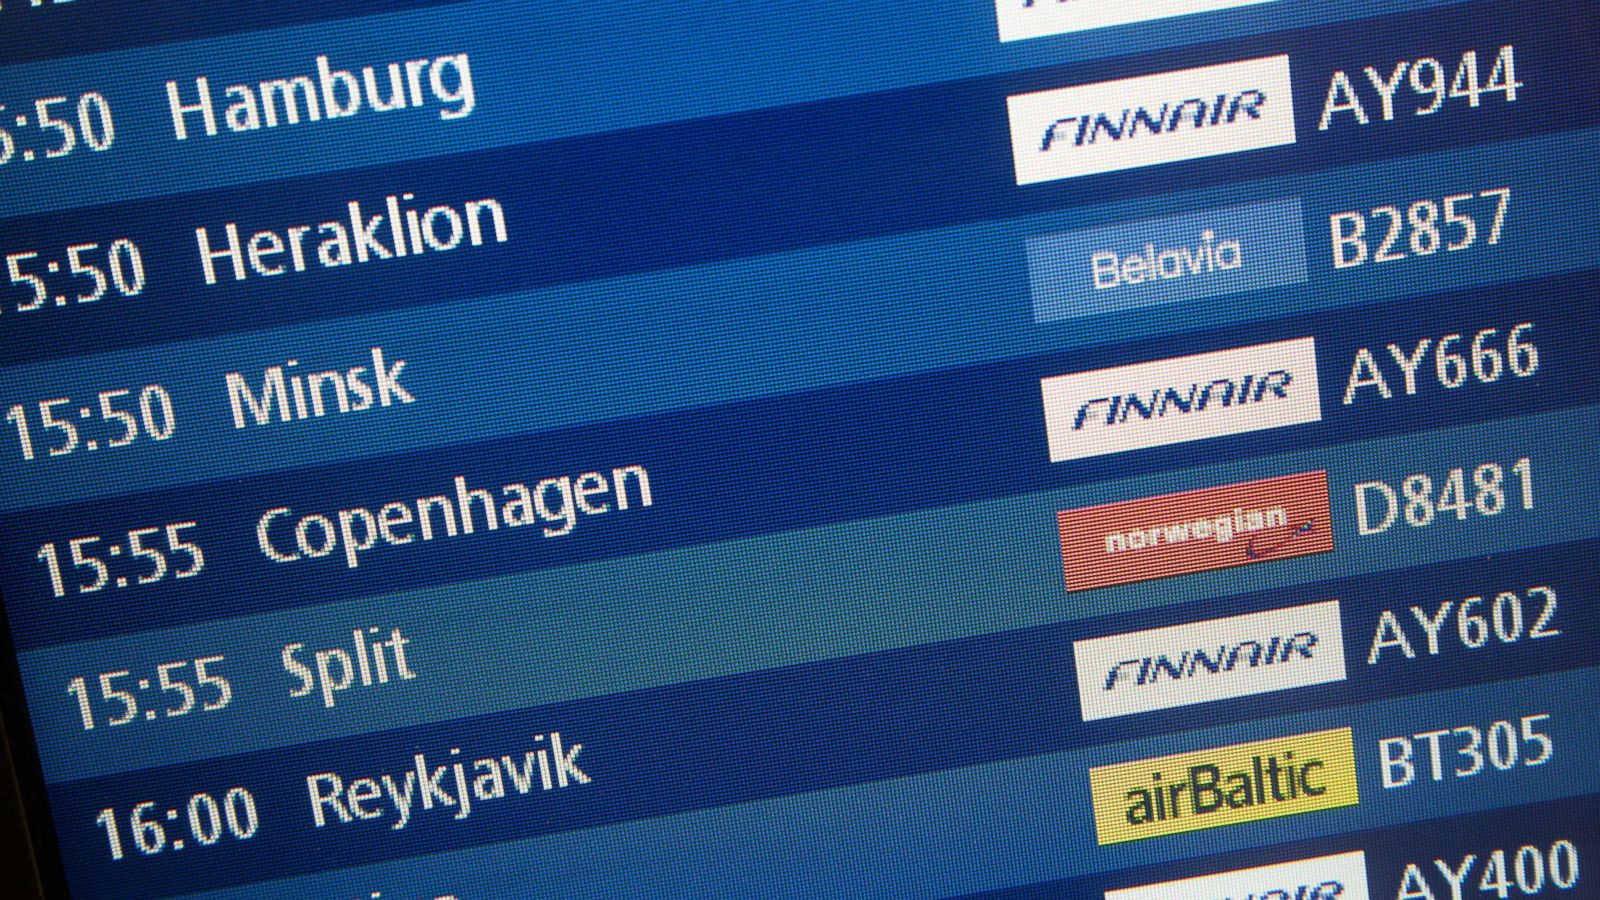 Flight 666 to 'HEL' Friday 13th ends after today - ABC